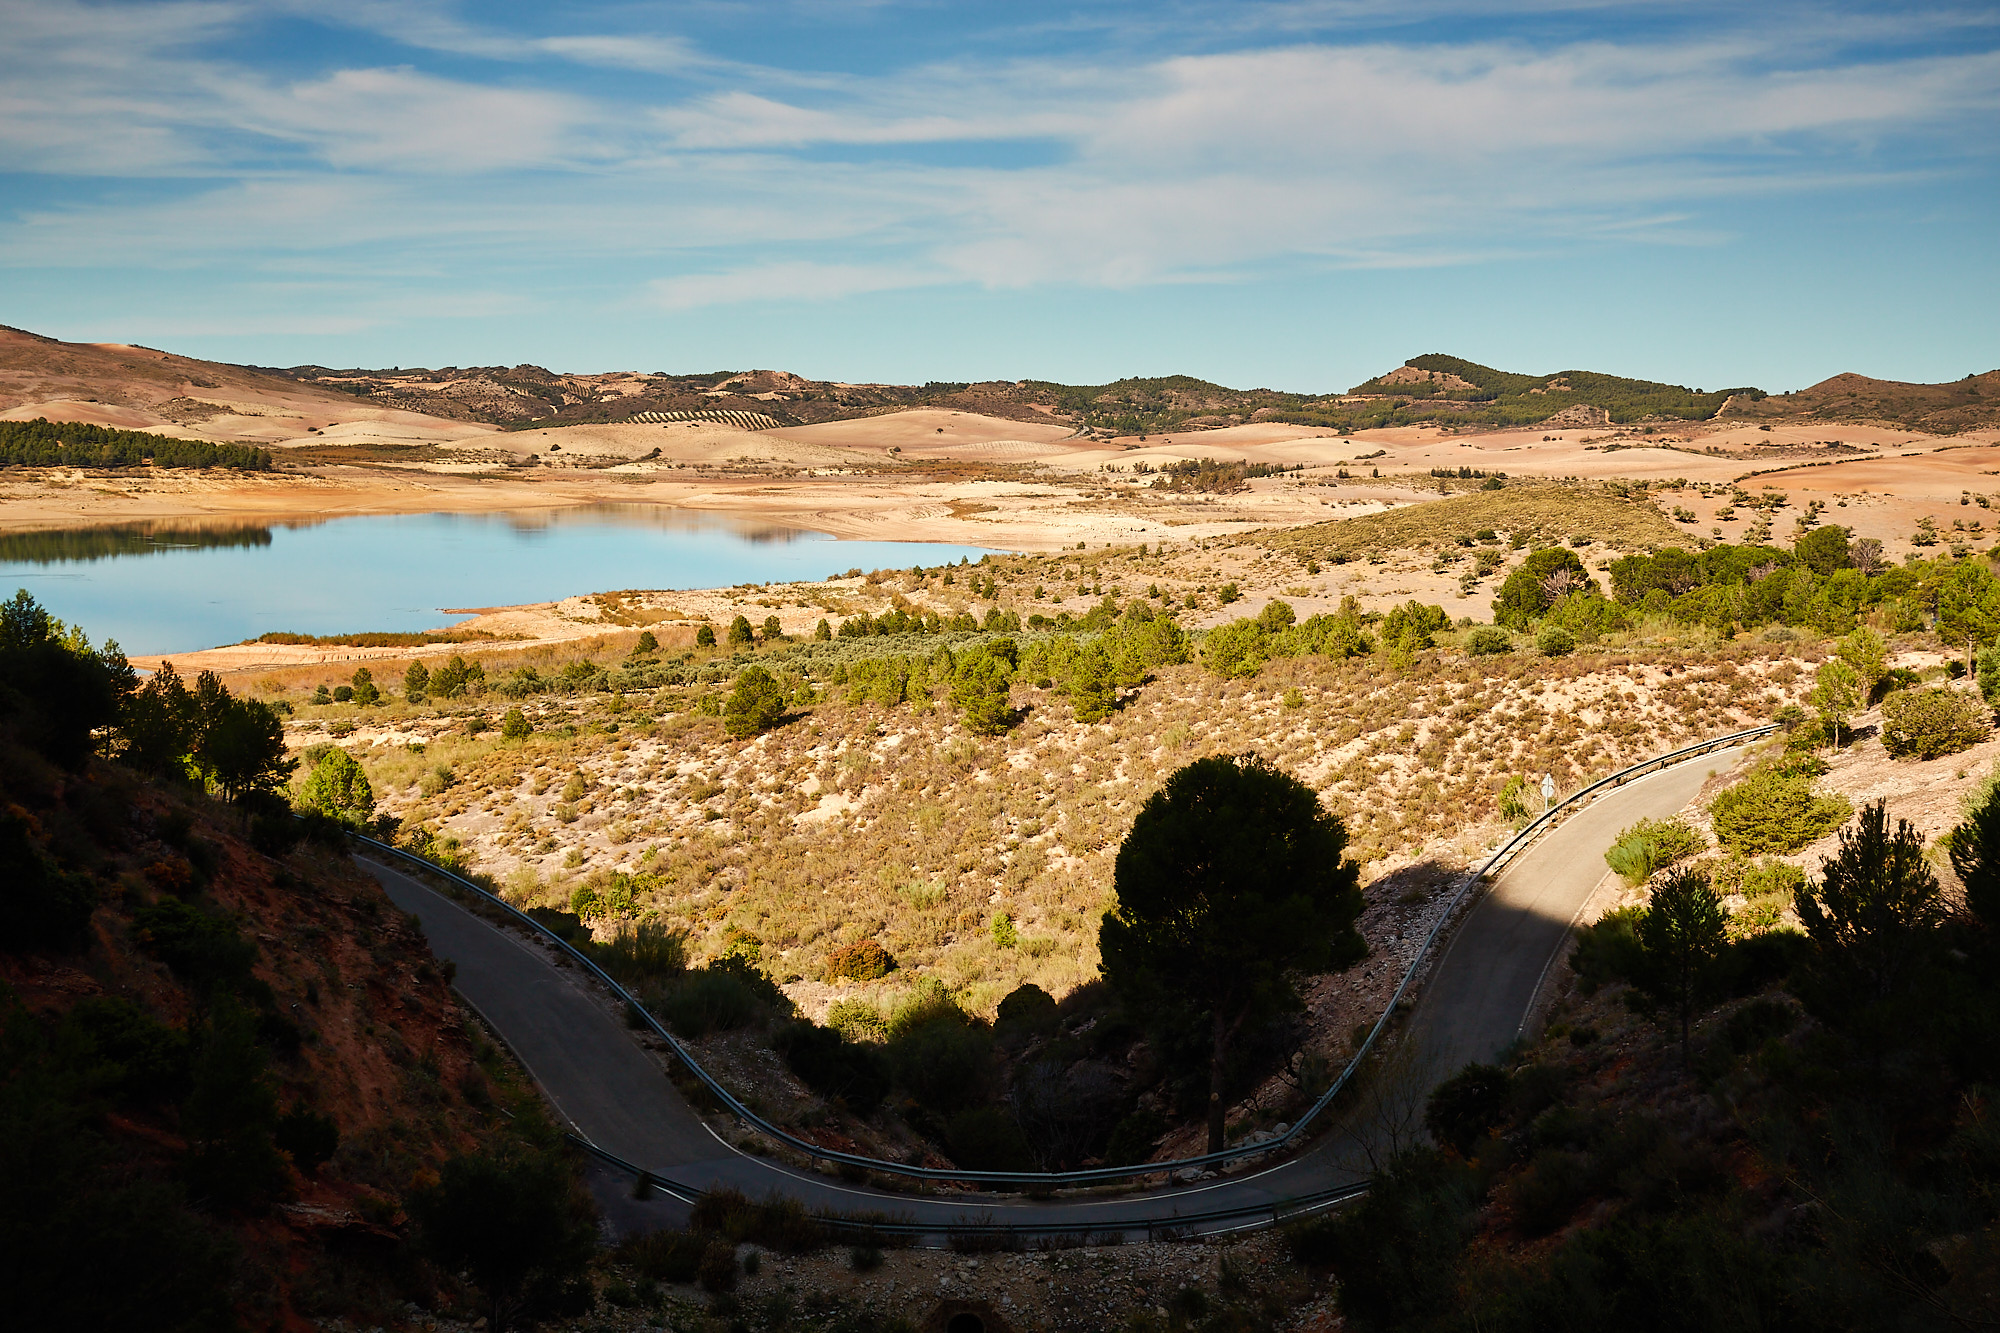 A landscape view of hot plains, olive groves and trees, with a blue sky and reservoir. A road with a bend is in the foreground.